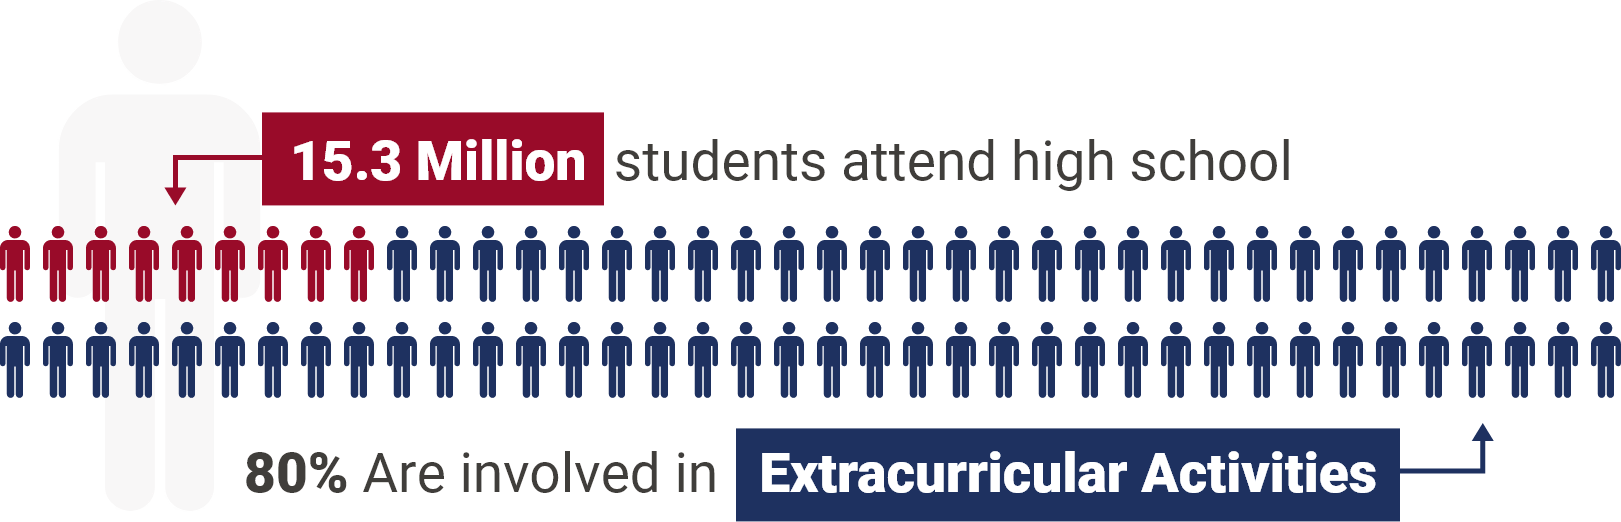 15.3 million students attend highschool and 80% are involved in extracurricular activities